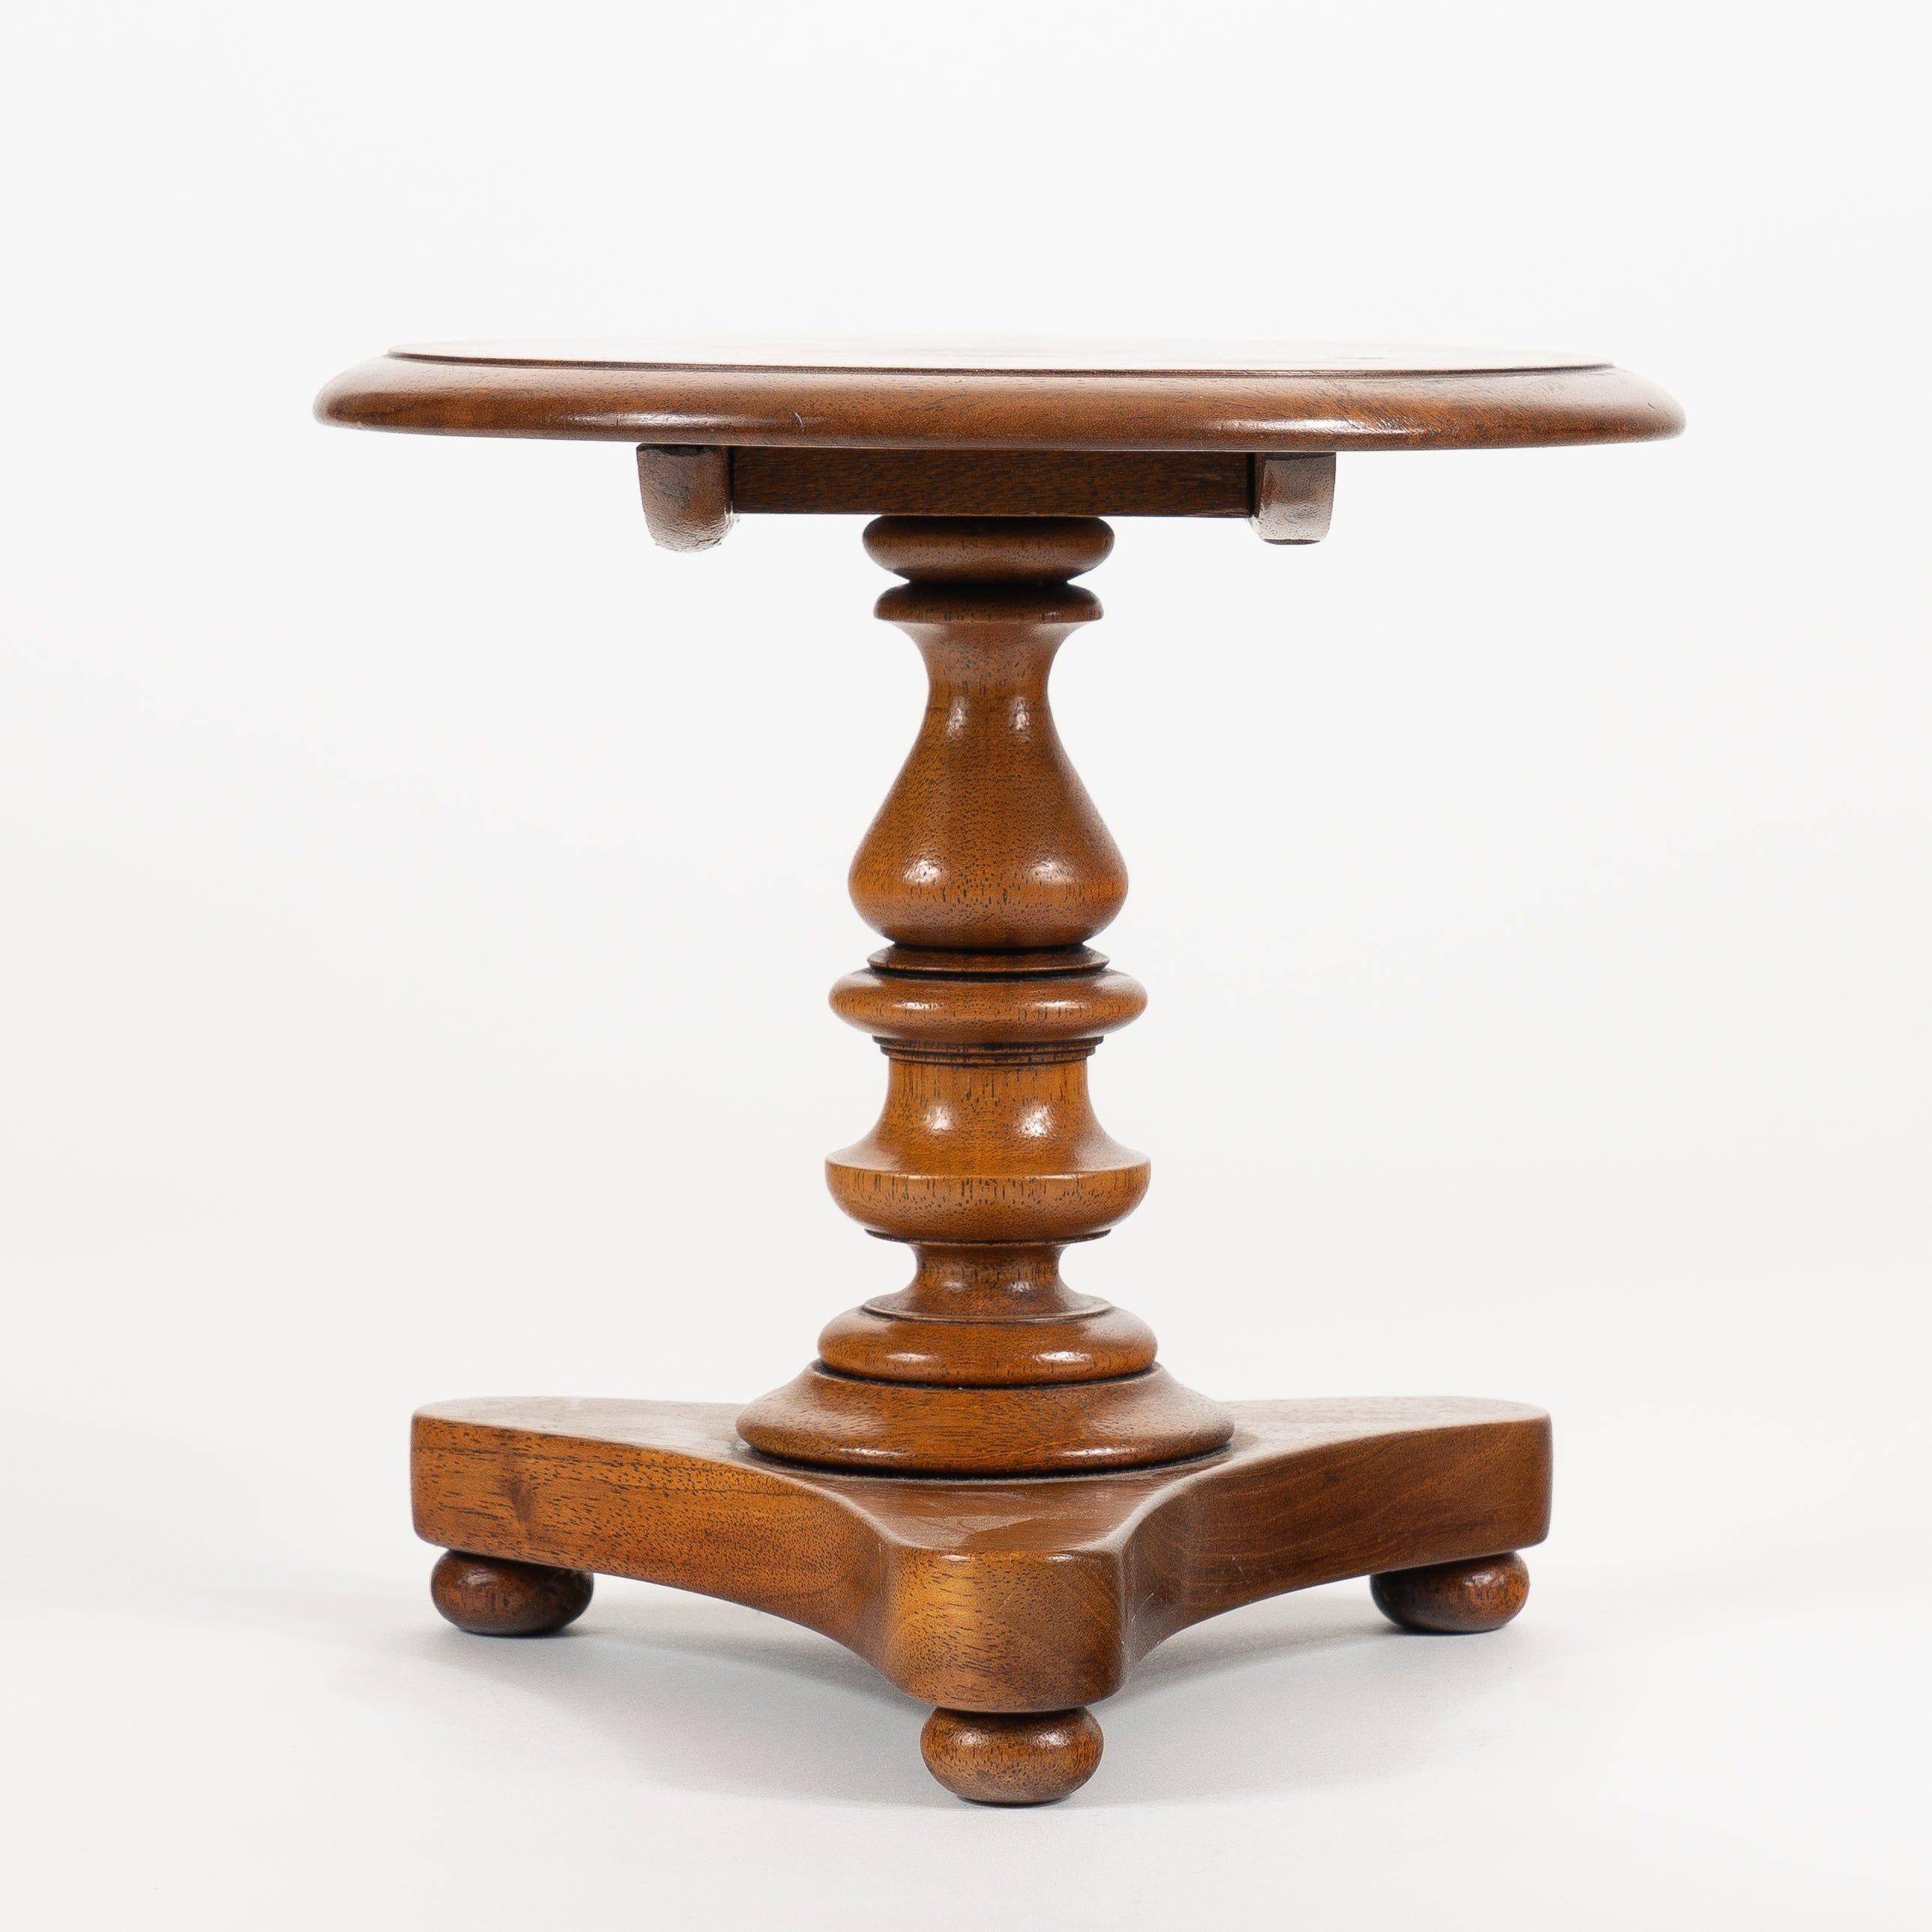 Mahogany American Miniature Tilt Top Miniature Table/Candle Stand by Thomas Clowney, 1840